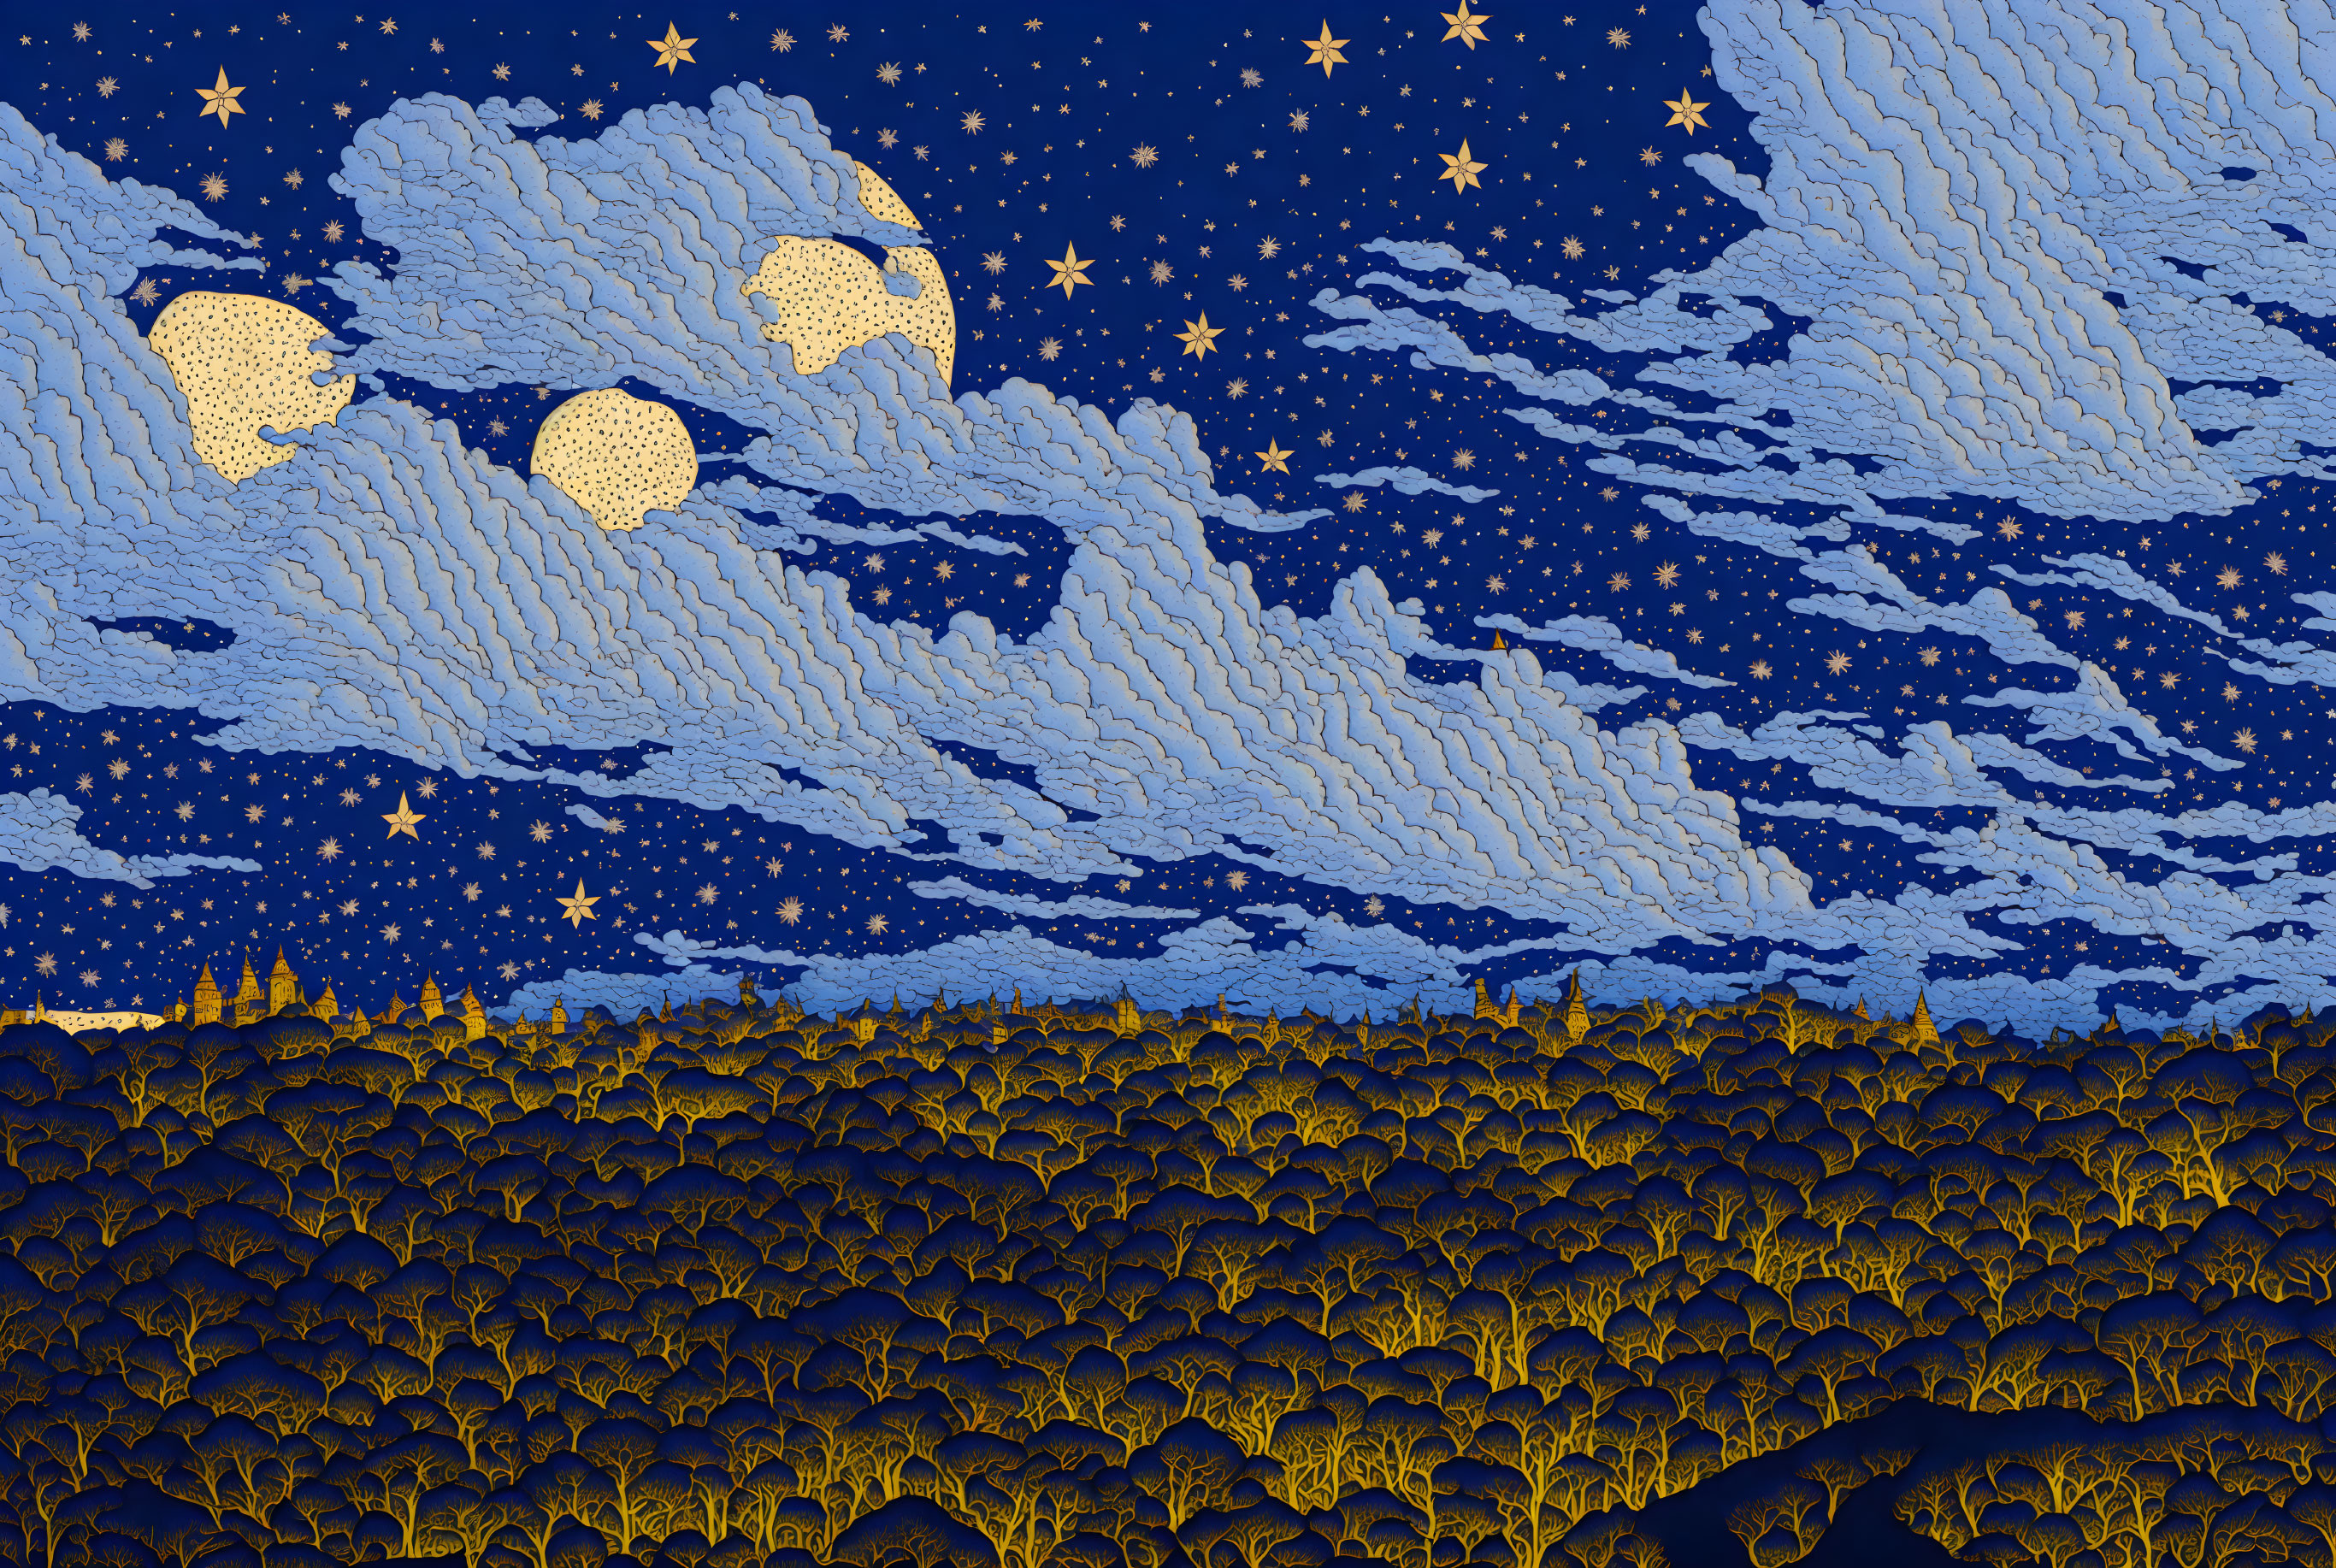 Night sky with stars and clouds above dark forest in Van Gogh-inspired style